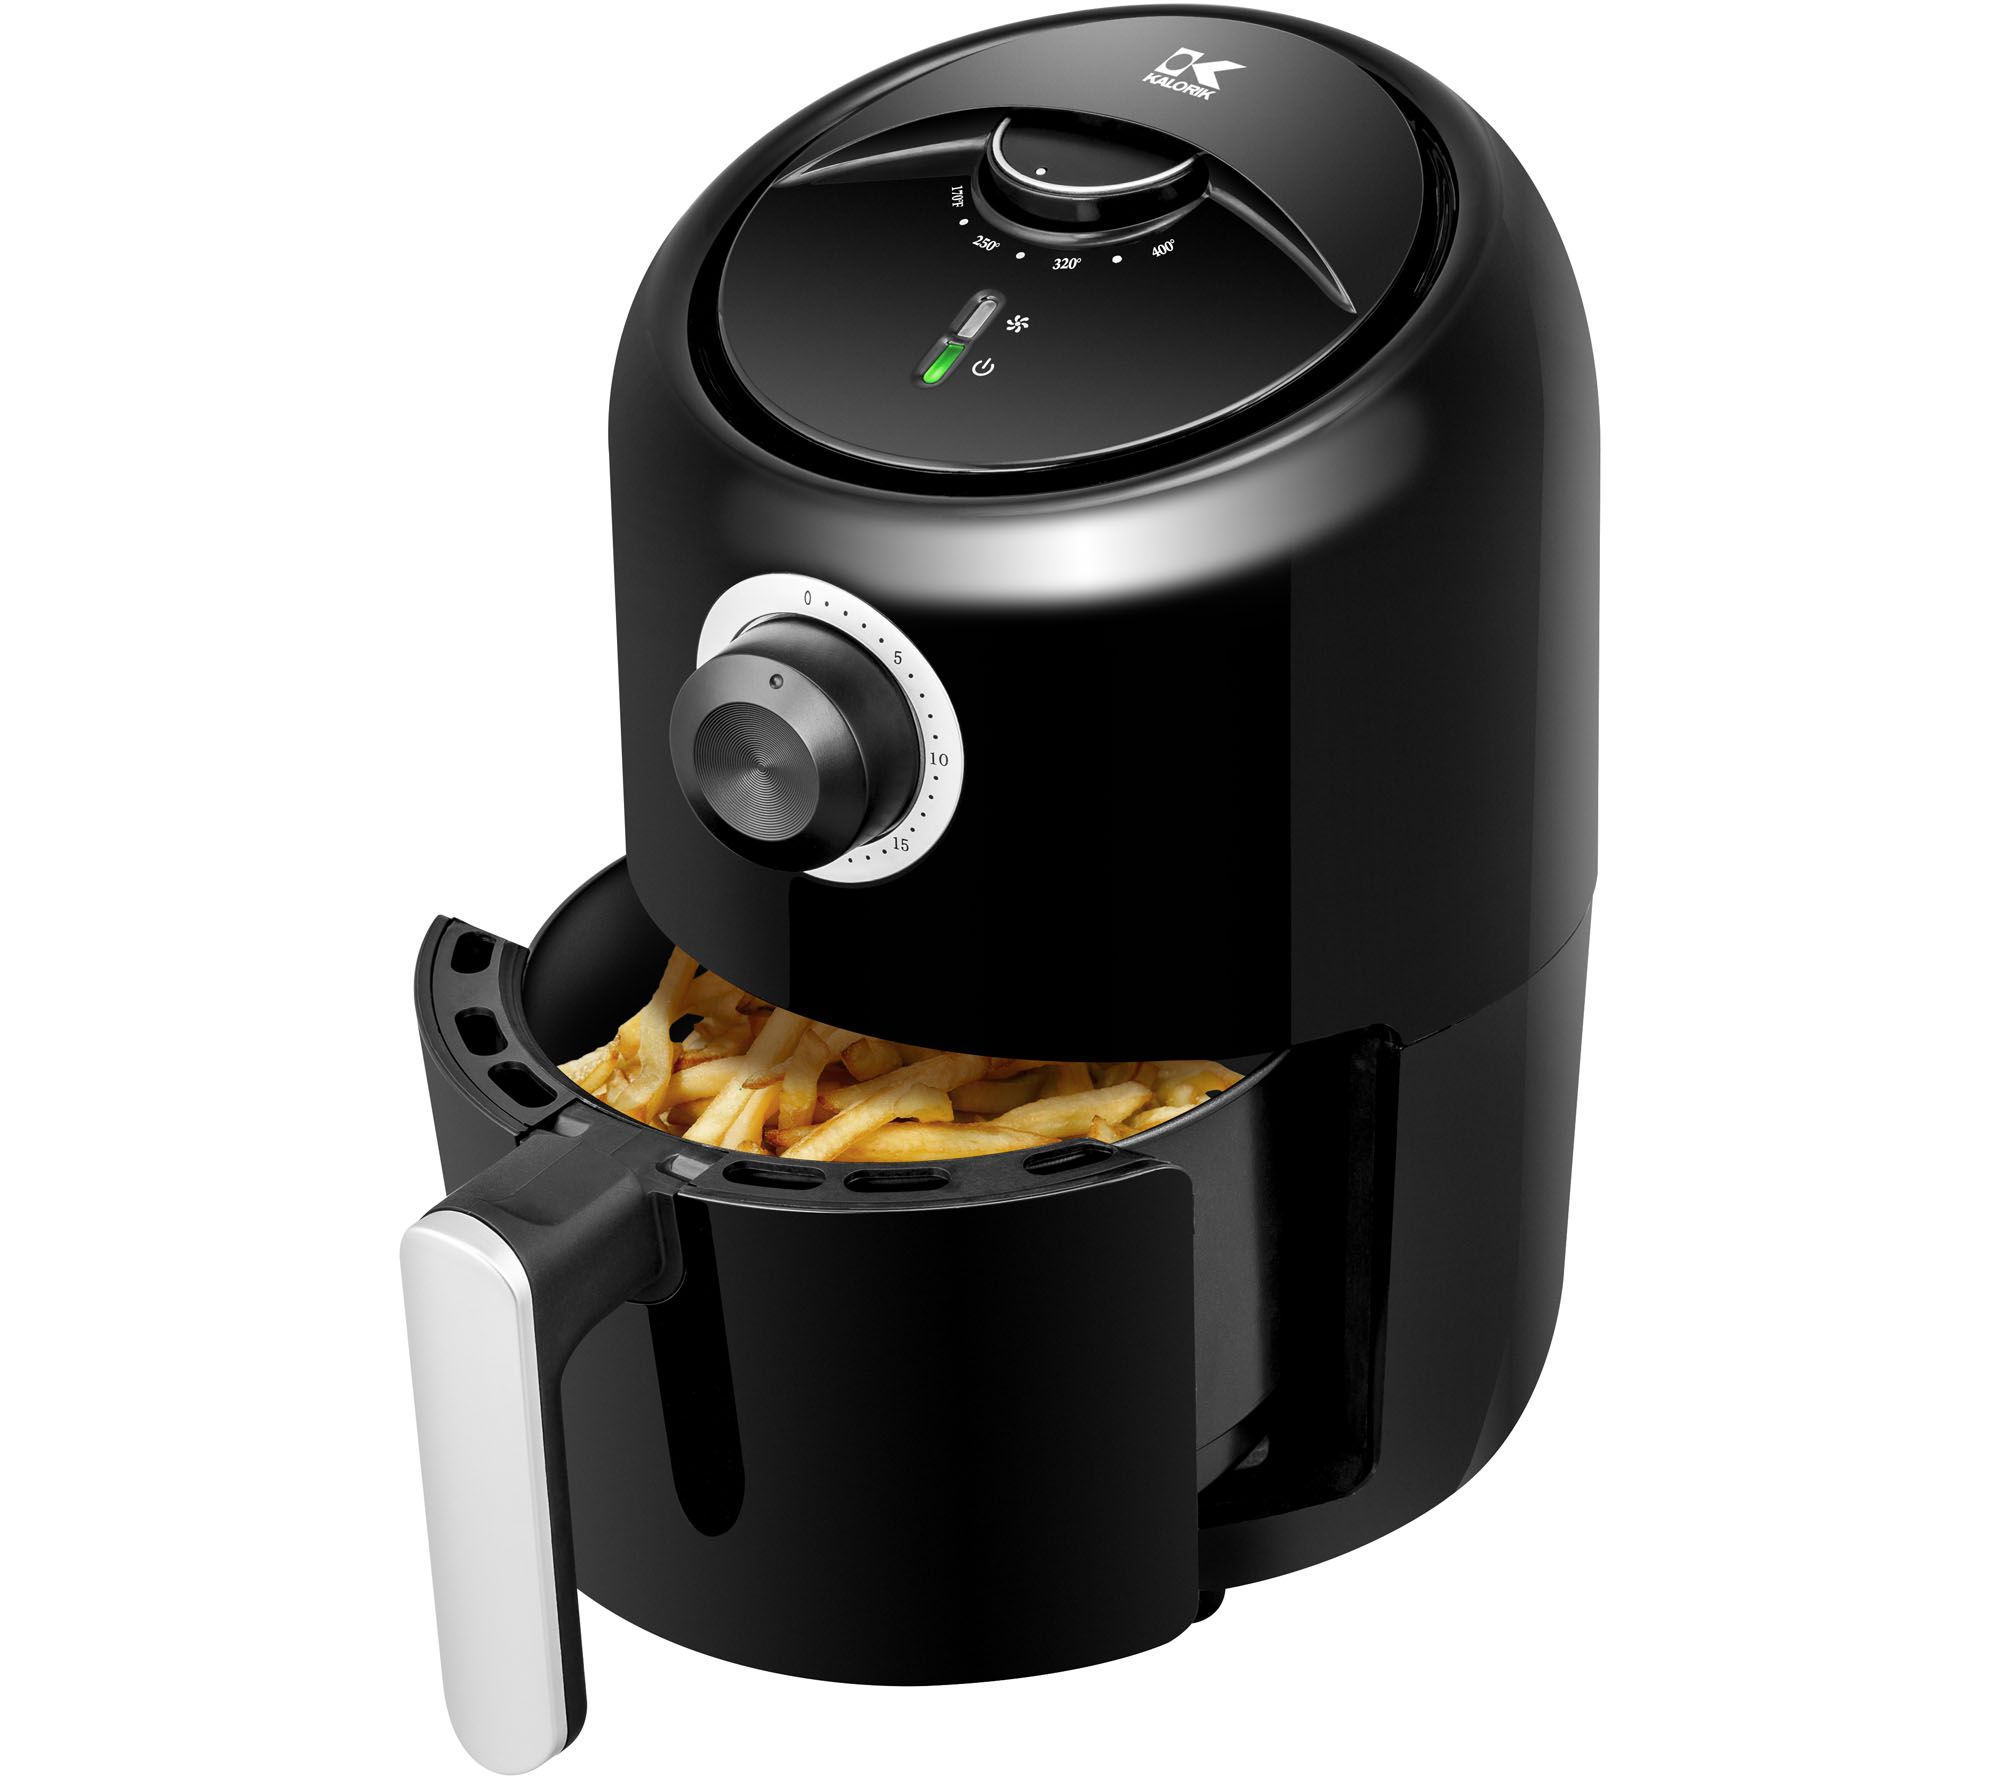 2.1Qt. Personal Air Fryer with Adjustable Temperature & Timer